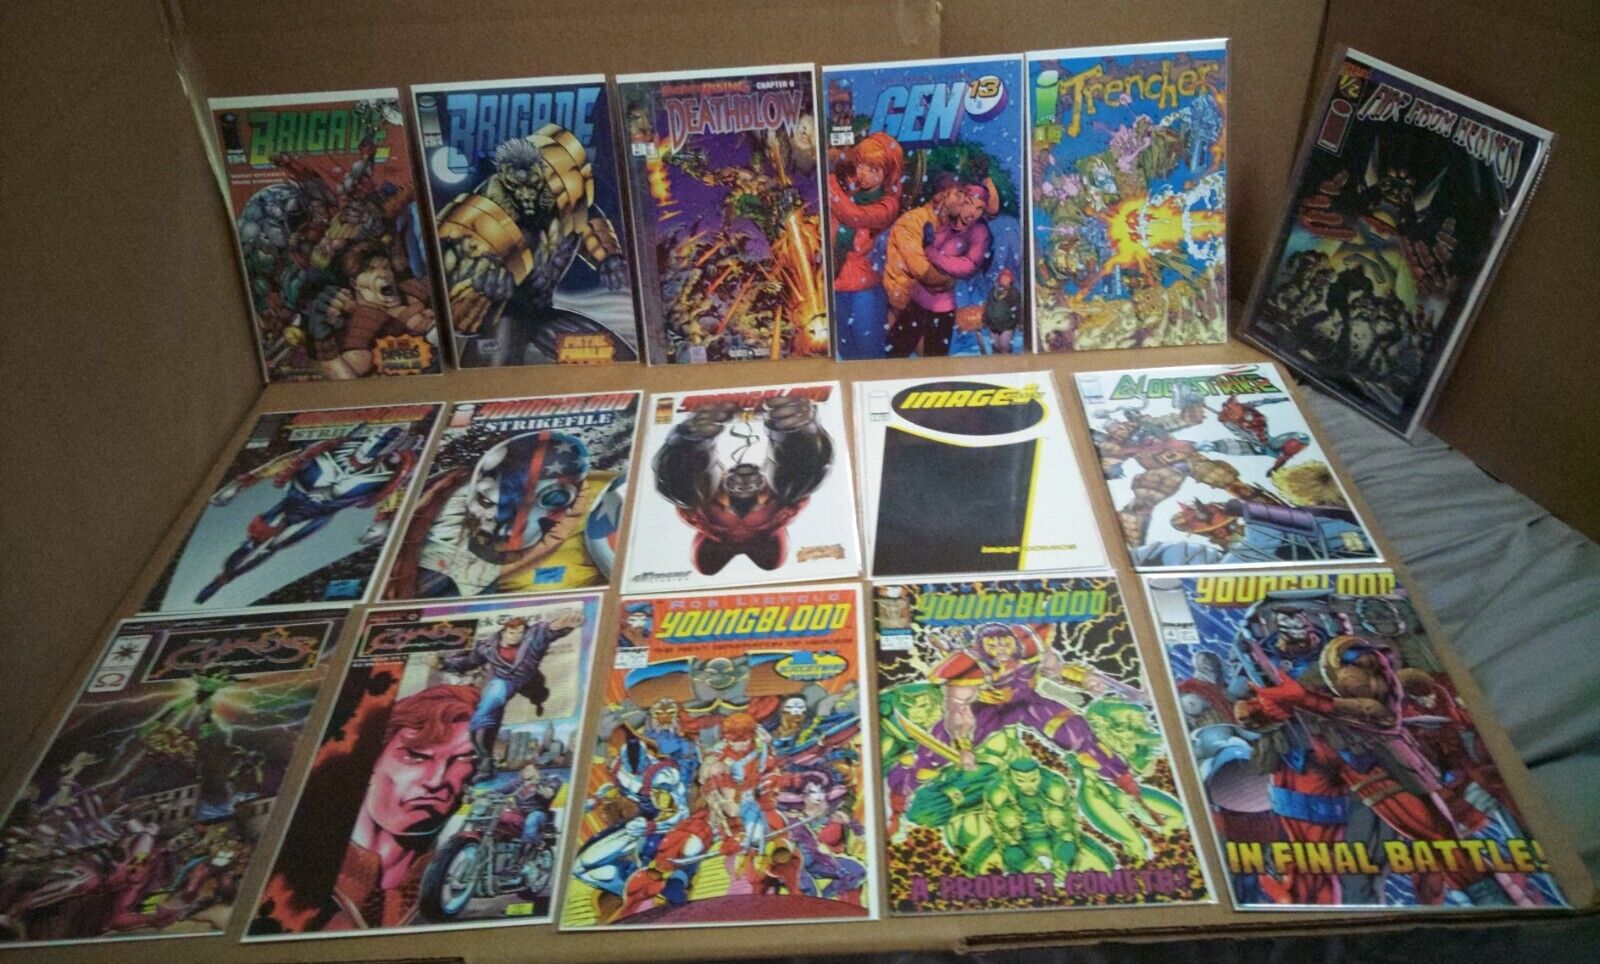 Valiant/Image Comic Book Lot of 16 books Chaos Effect,Youngblood,Brigade,GEN13++